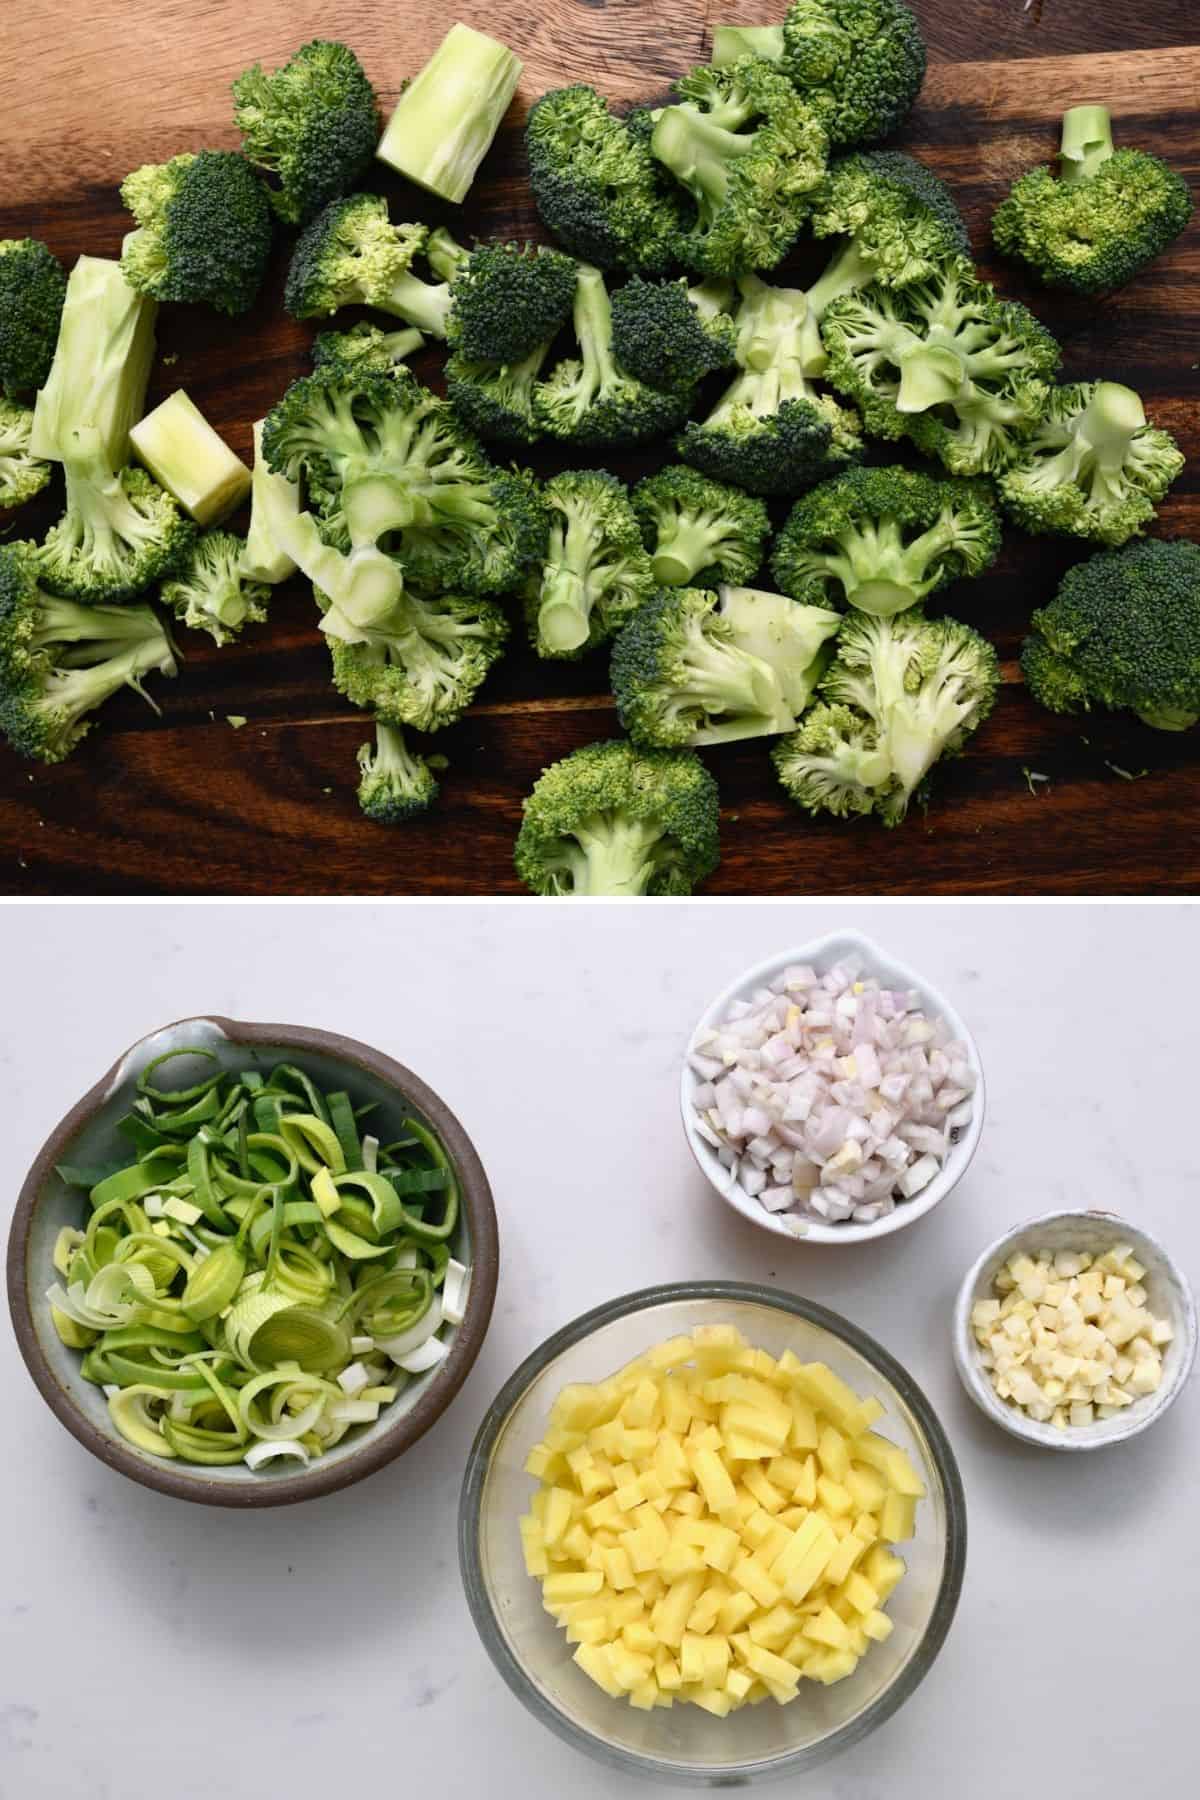 Chopped ingredients for broccoli soup